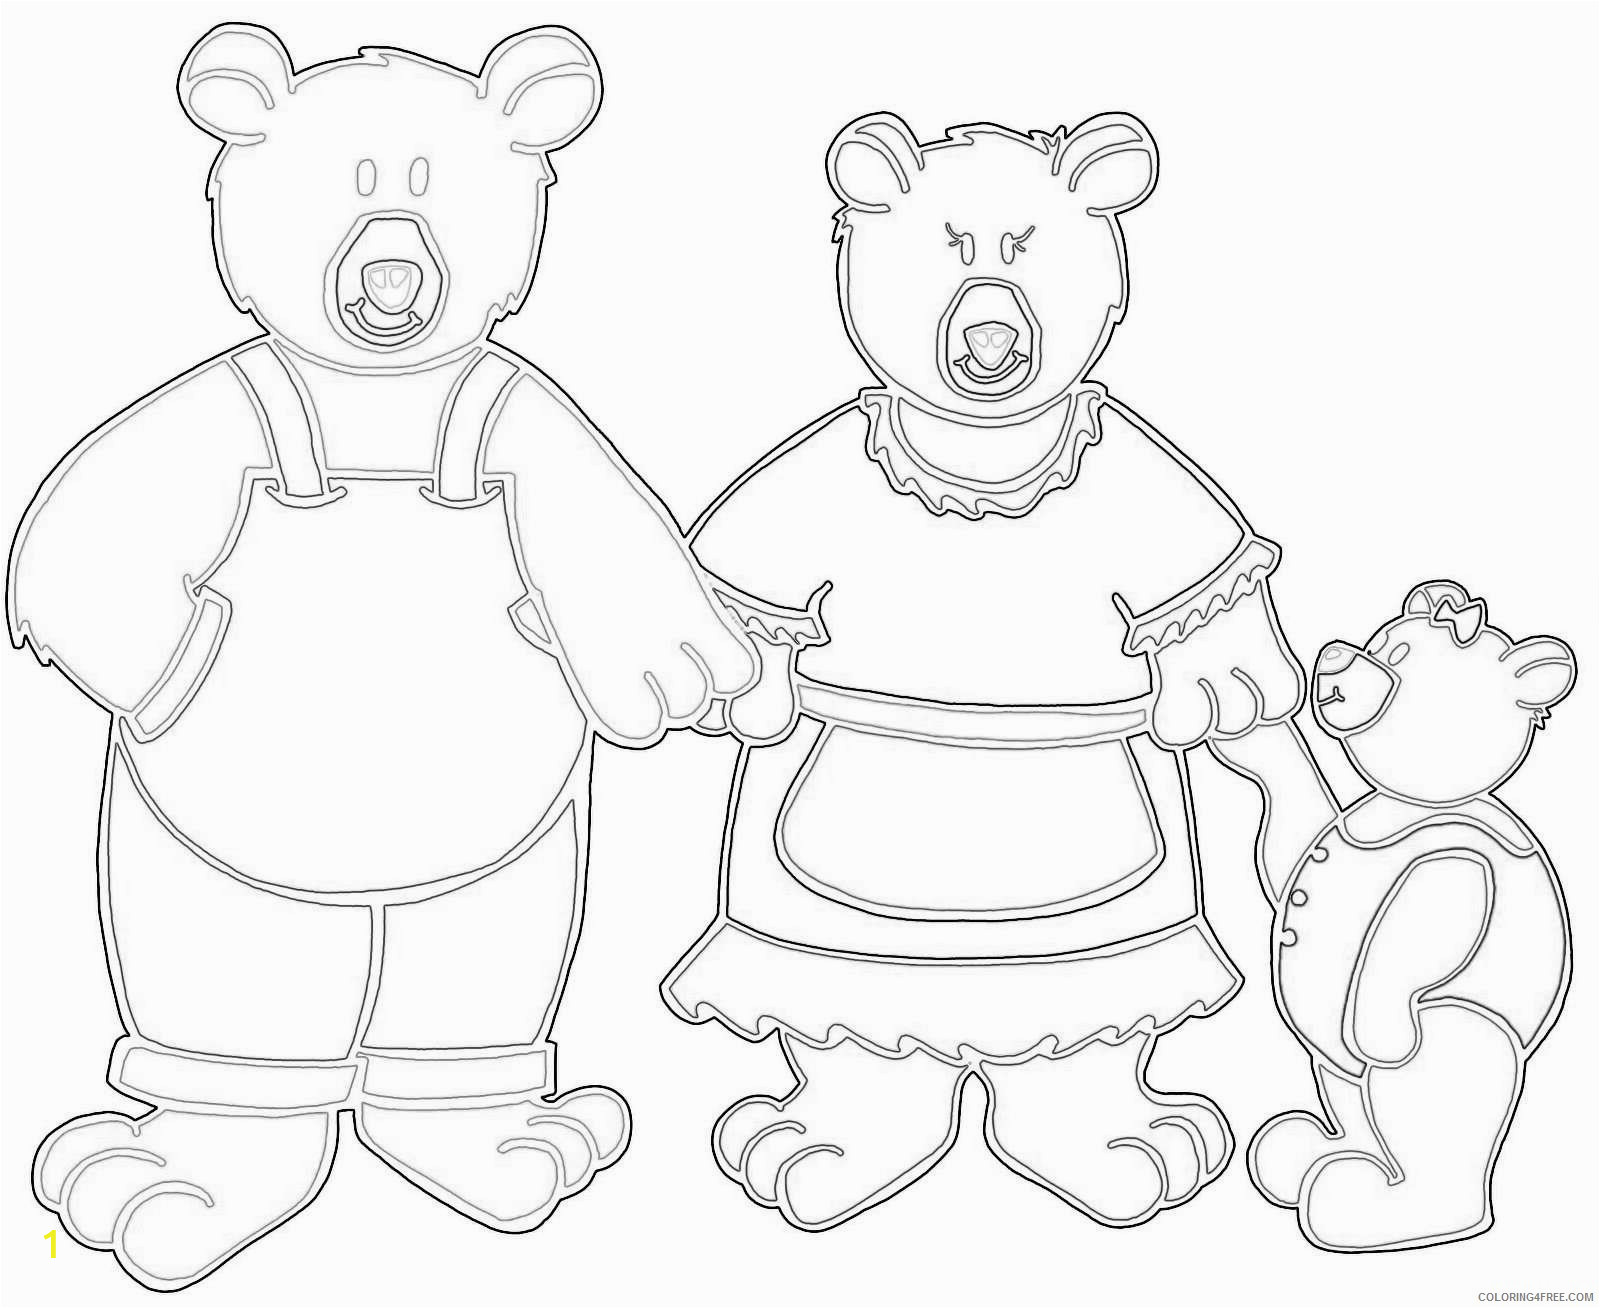 Goldilocks and the Three Bears Coloring Page Goldilocks and the Three Bears Co 9smbts Coloring